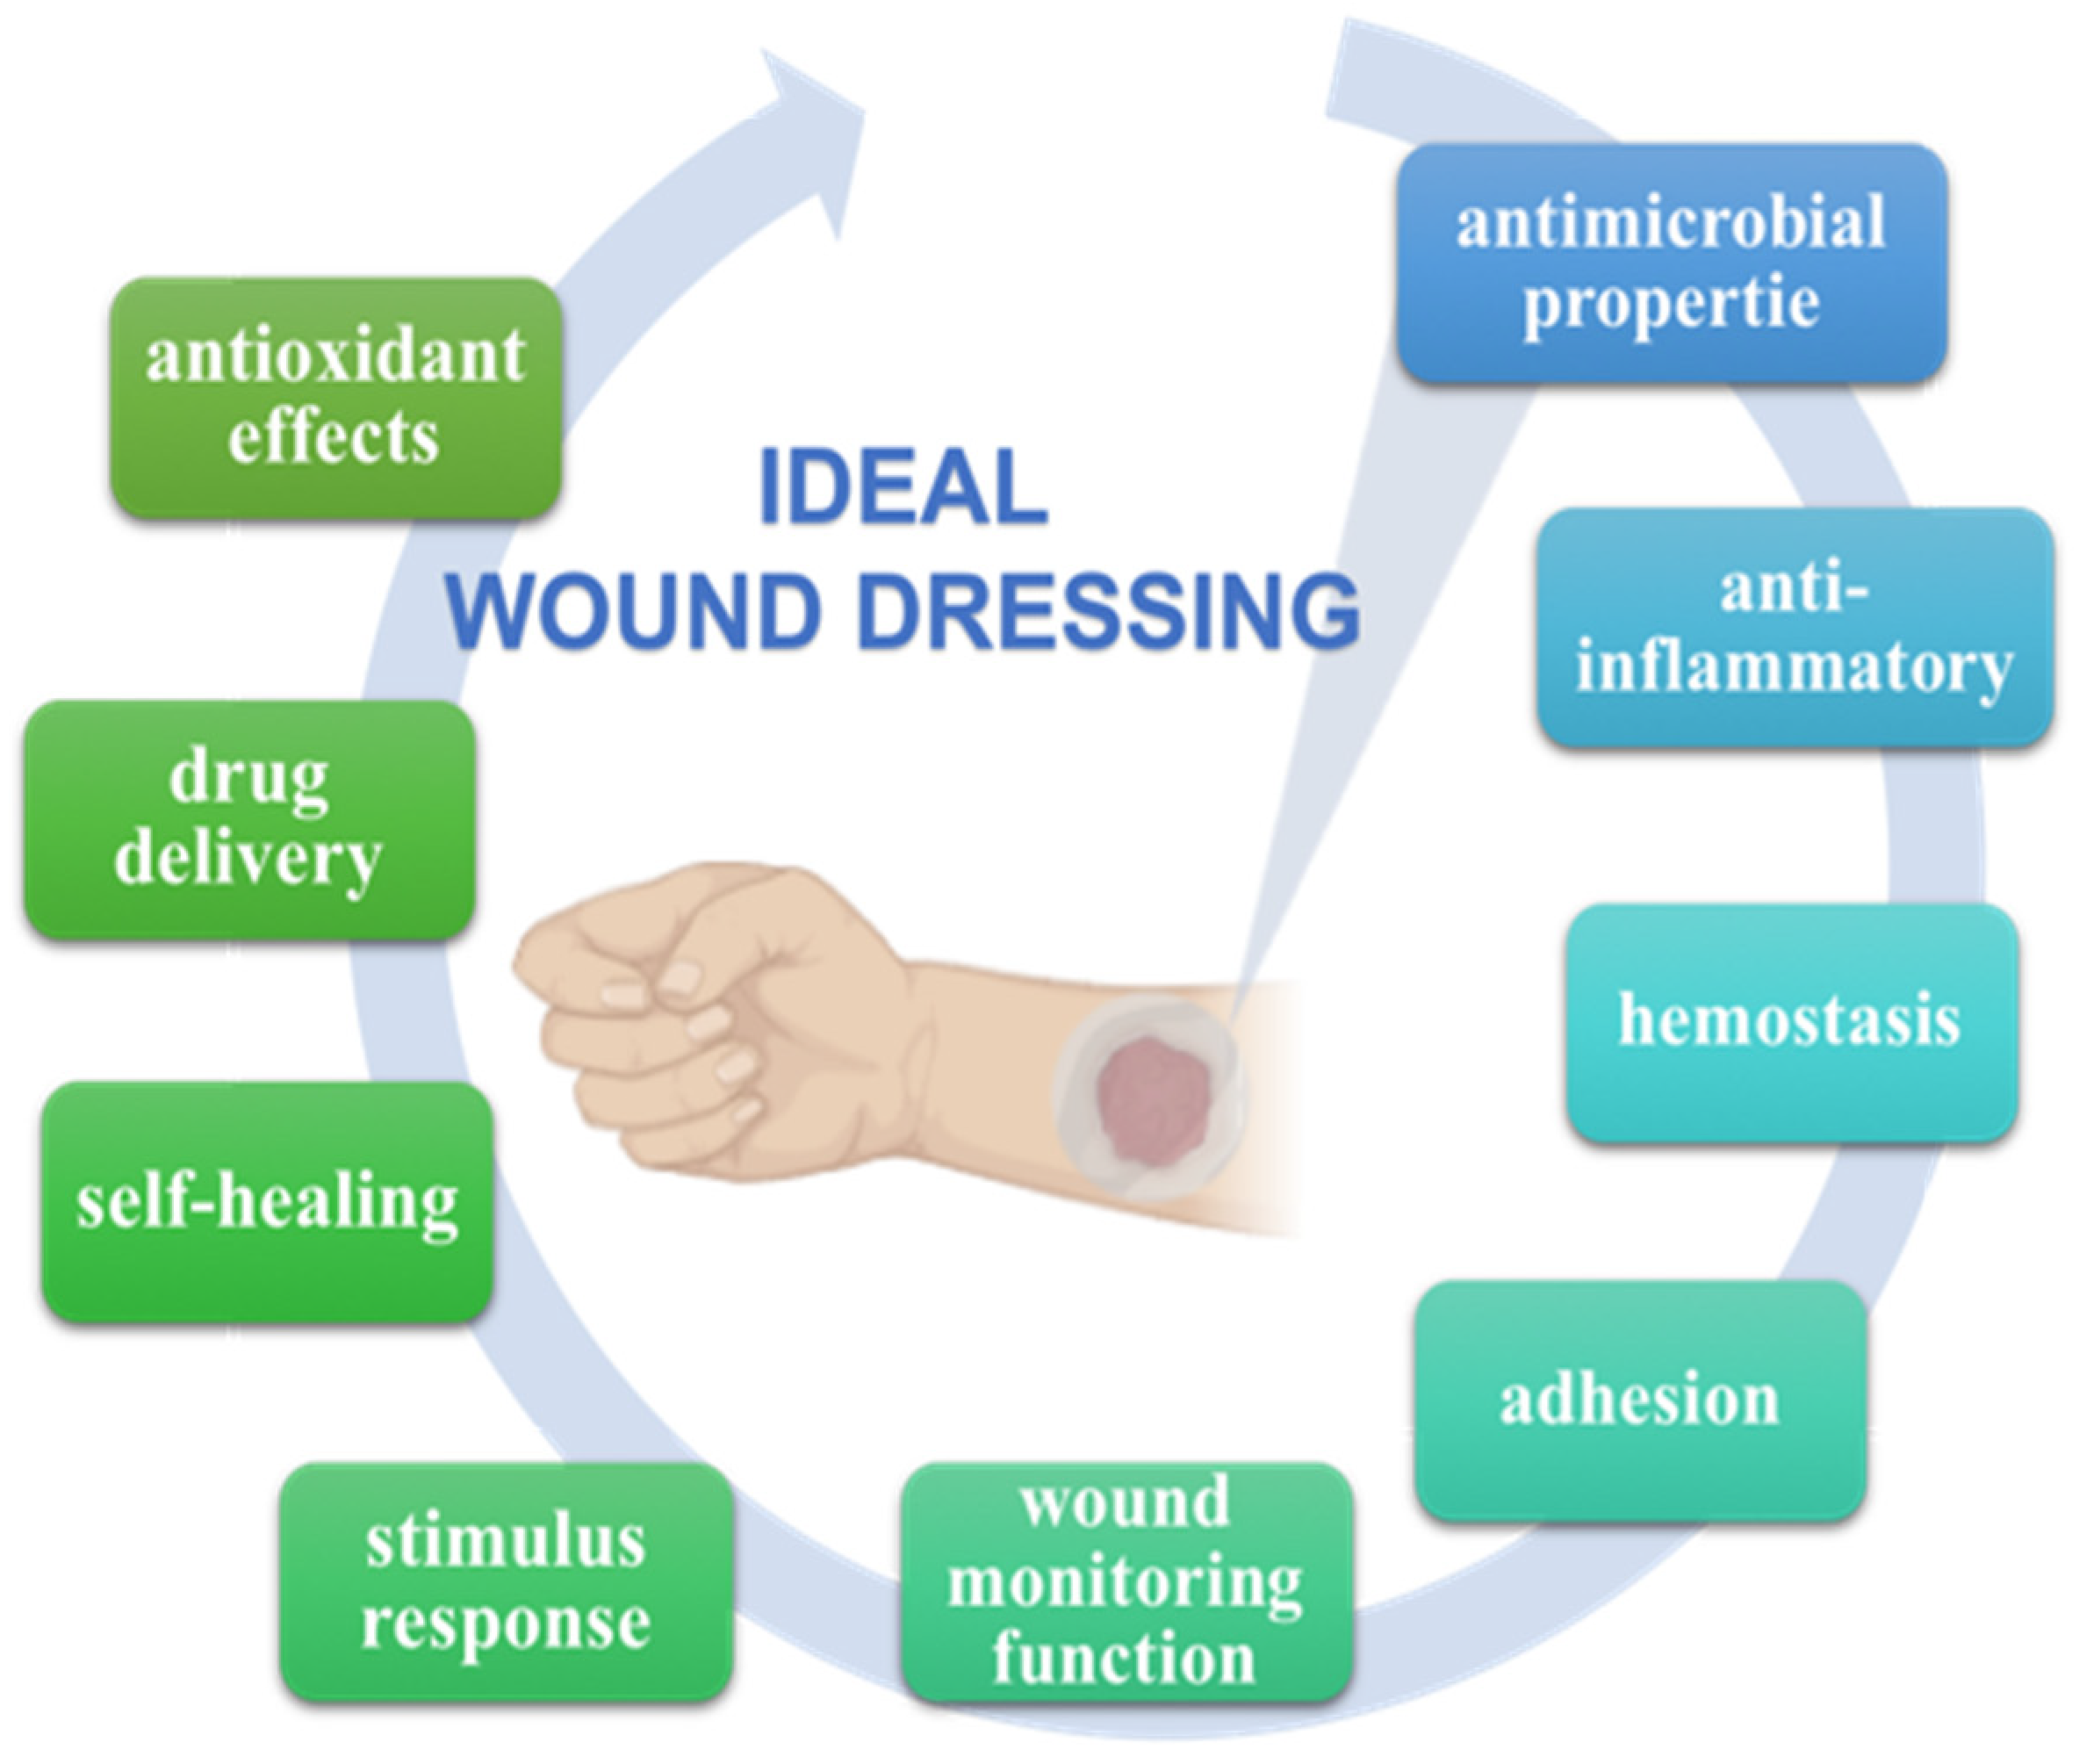 Share more than 128 classification of surgical dressing super hot ...